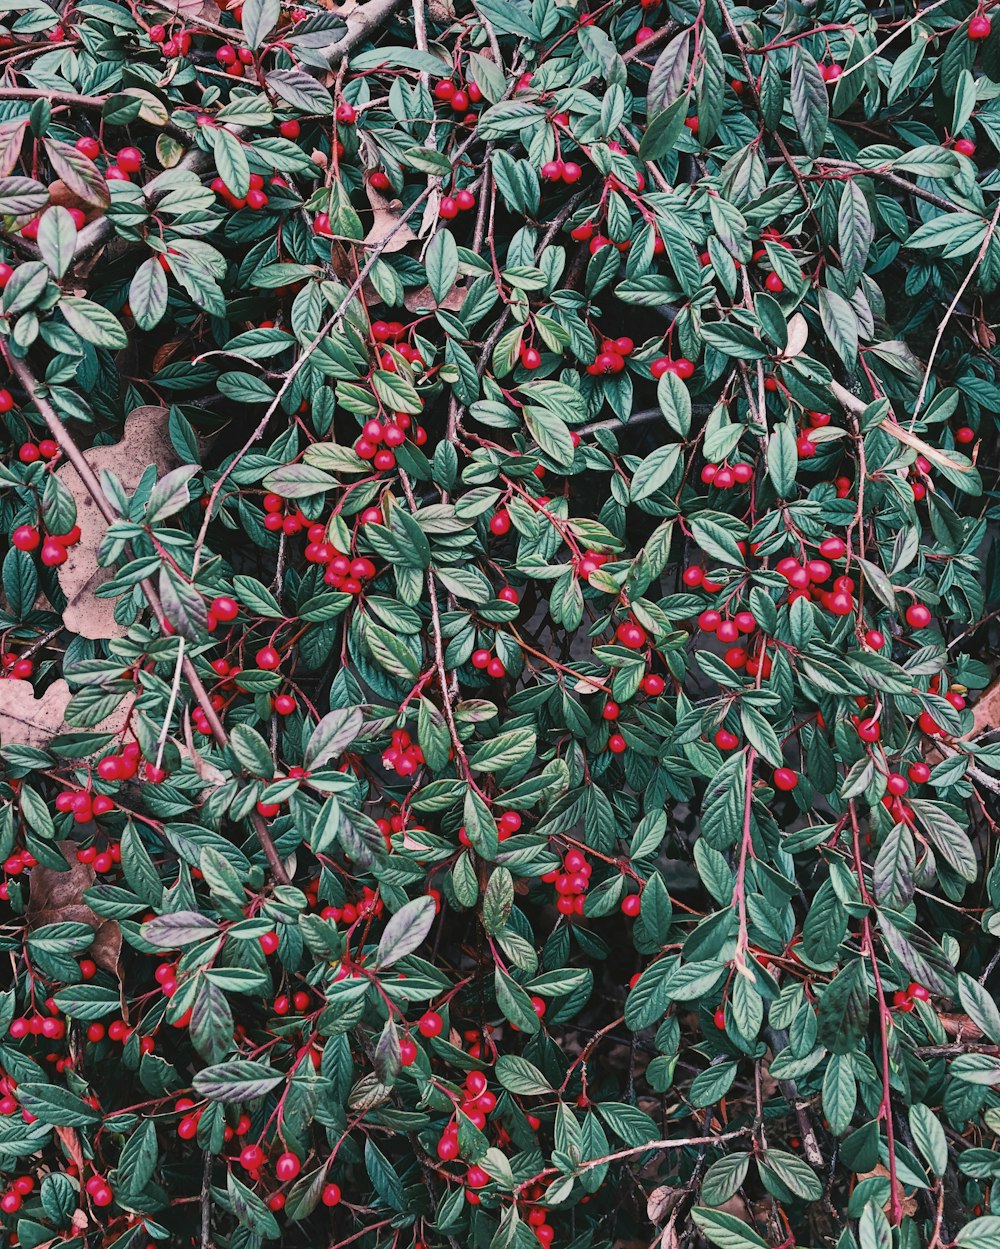 photograph of red fruits and leaves